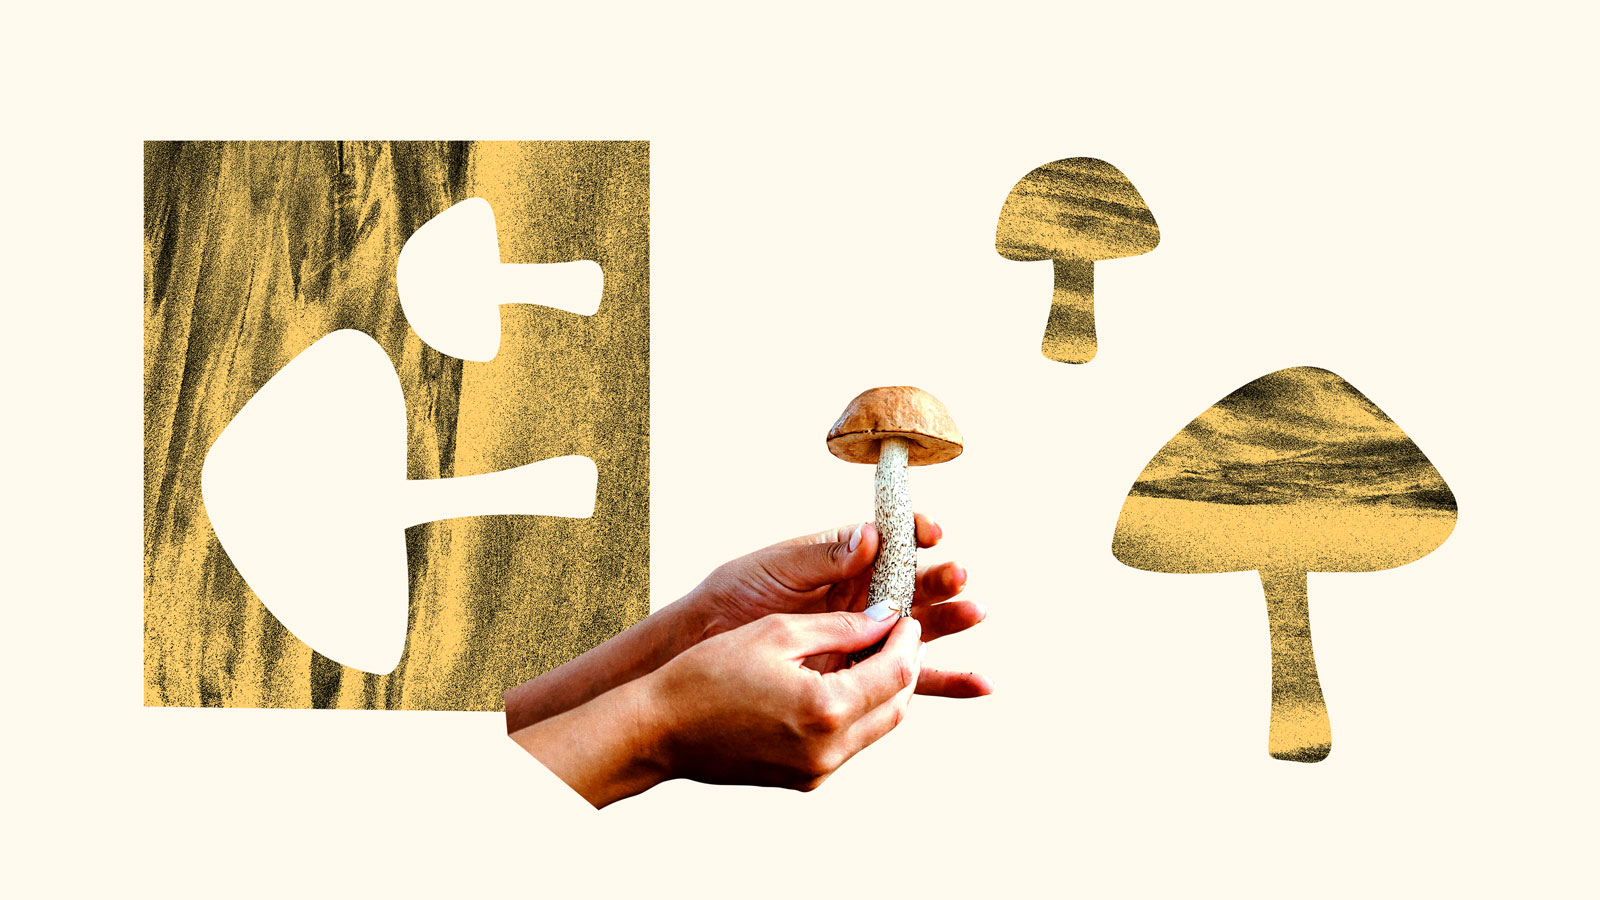 Hands holding foraged mushroom surrounded by yellow mushroom shapes